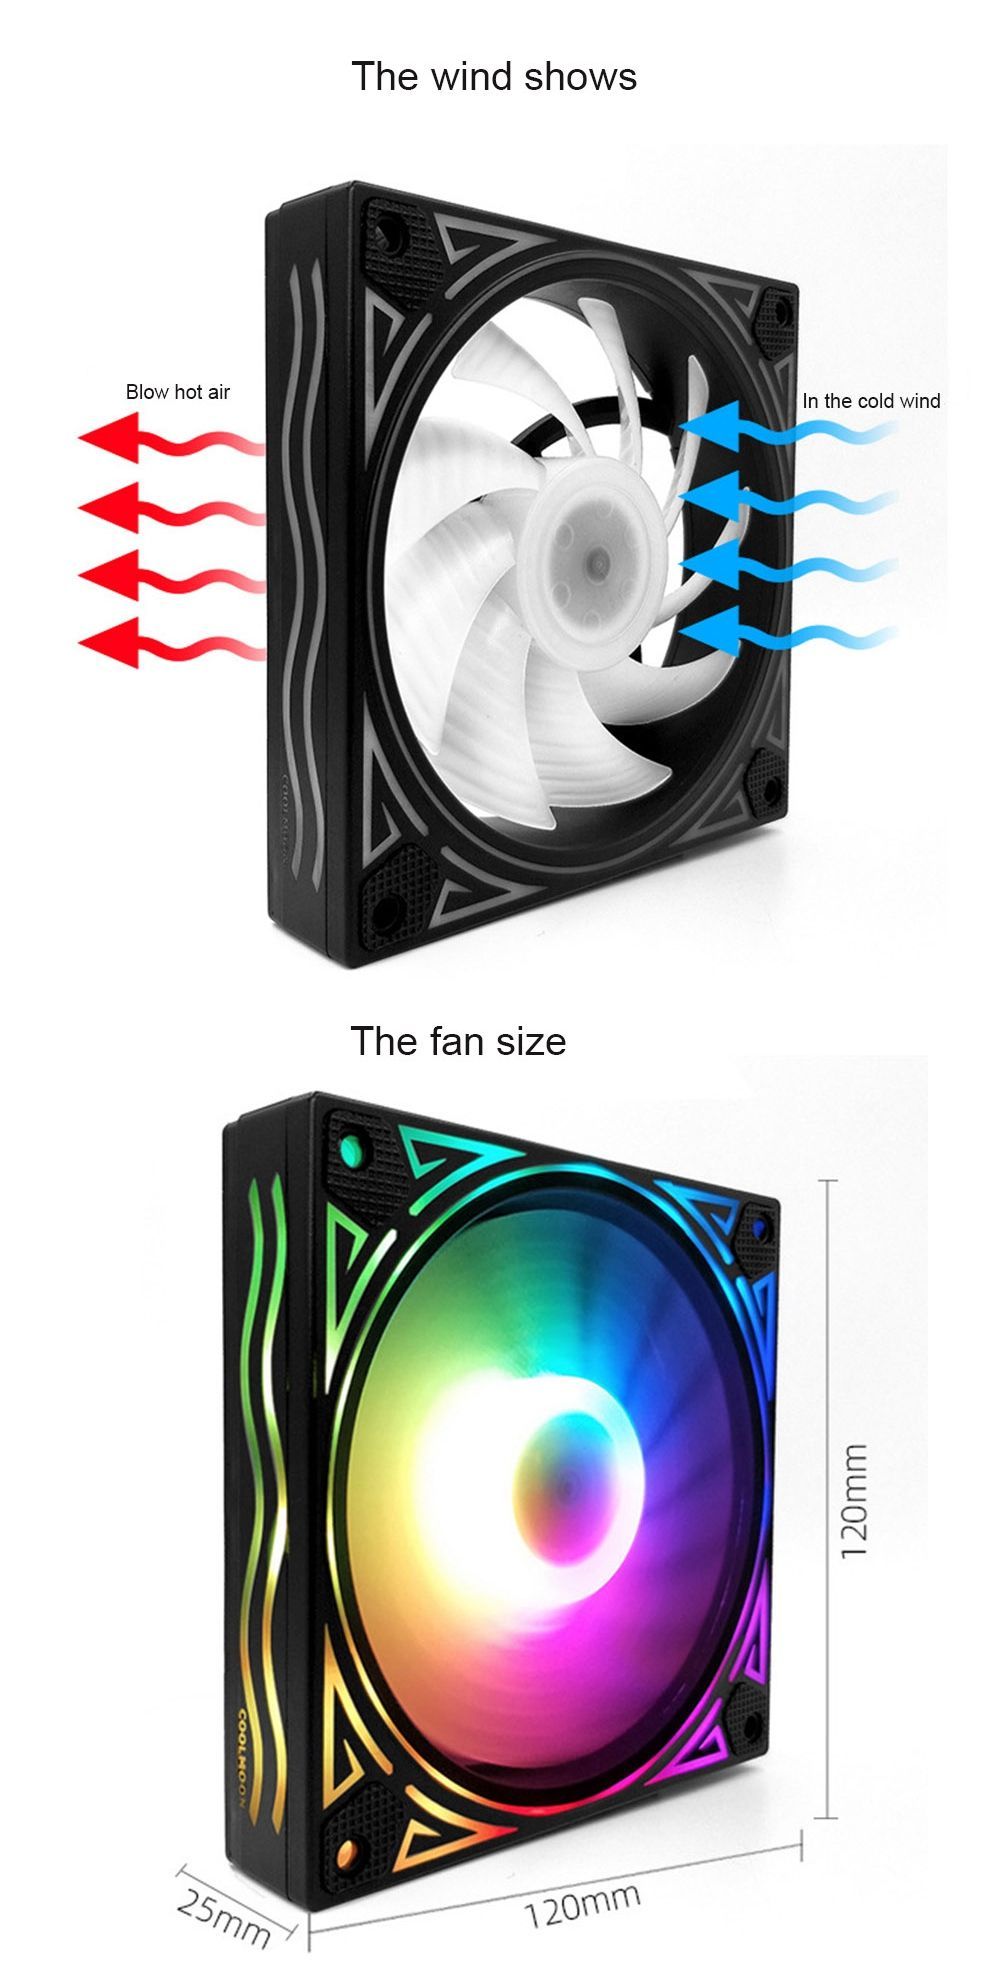 Coolmoon-BILLOW-5PCS-Colorful-Backlight-120mm-CPU-Cooling-Fan-Mute-PC-Heatsink-with-the-Remote-Contr-1580327